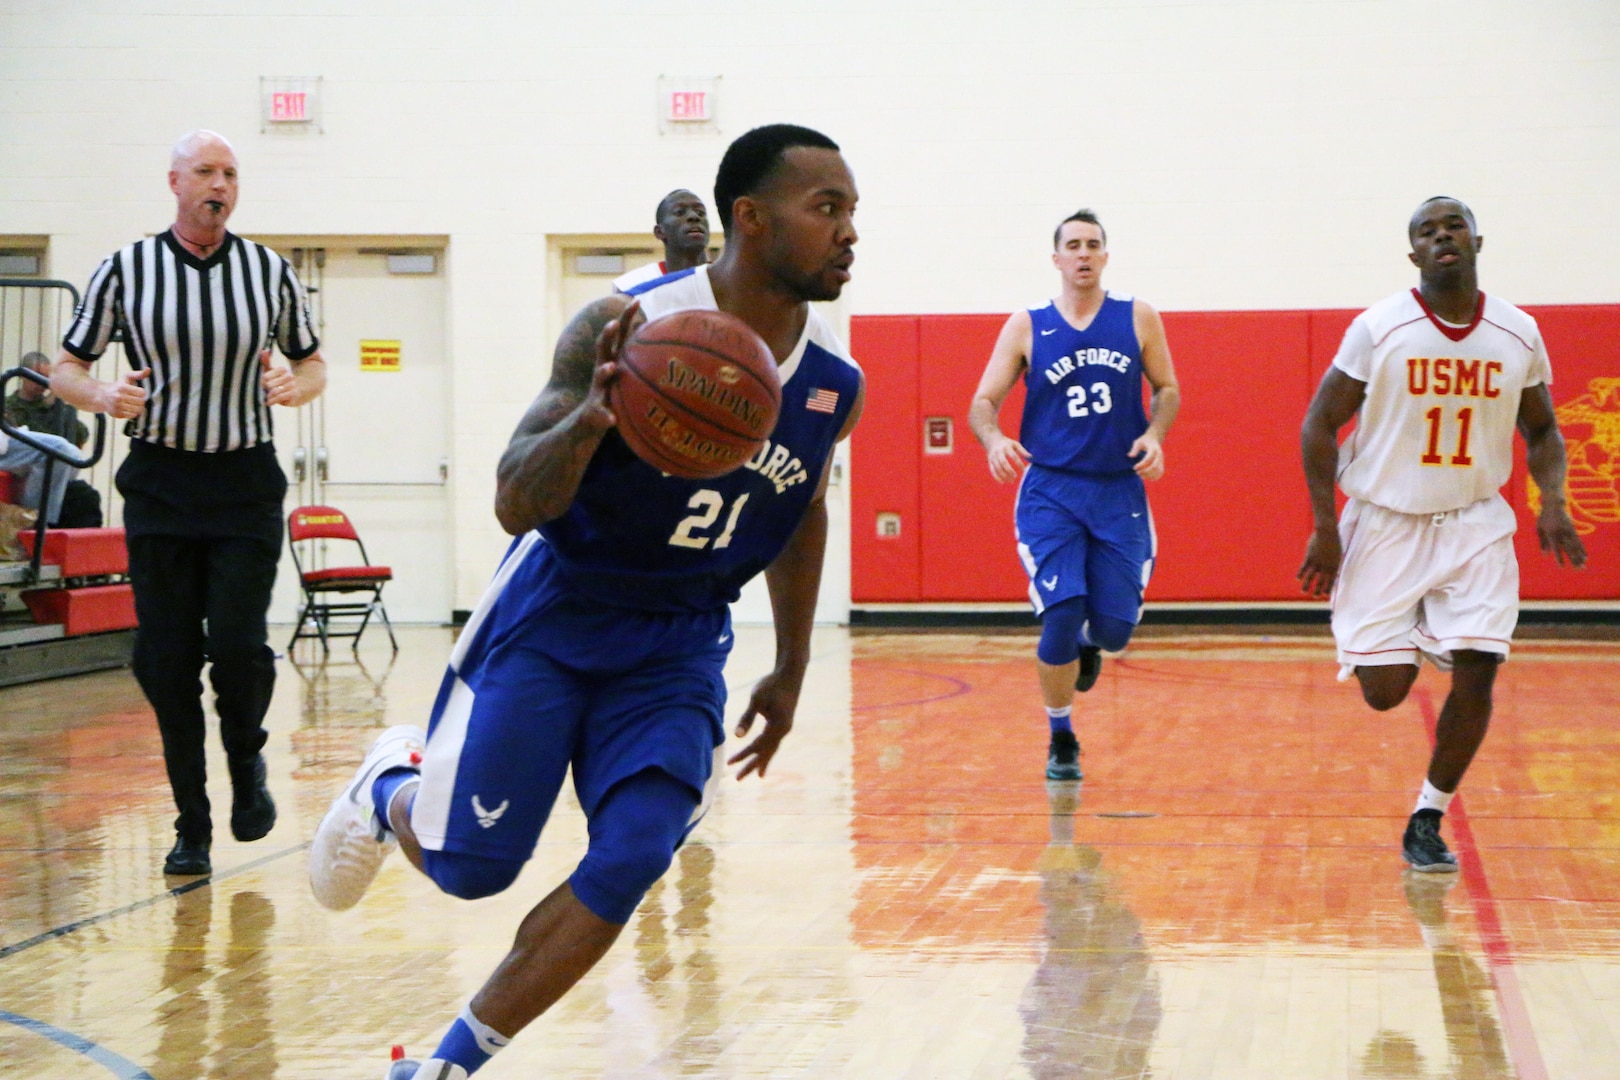 Senior Airman Daveon Allen of Nellis AFB, Nevada drives the lane during the 2016 Armed Forces Men's Basketball Championship held at MCB Quantico, Va. from 1-7 November.  Air Force won the first contest 66-62 over the Marines.  The best two teams during the doubel round robin will face each other for the 2016 Armed Forces crown.  